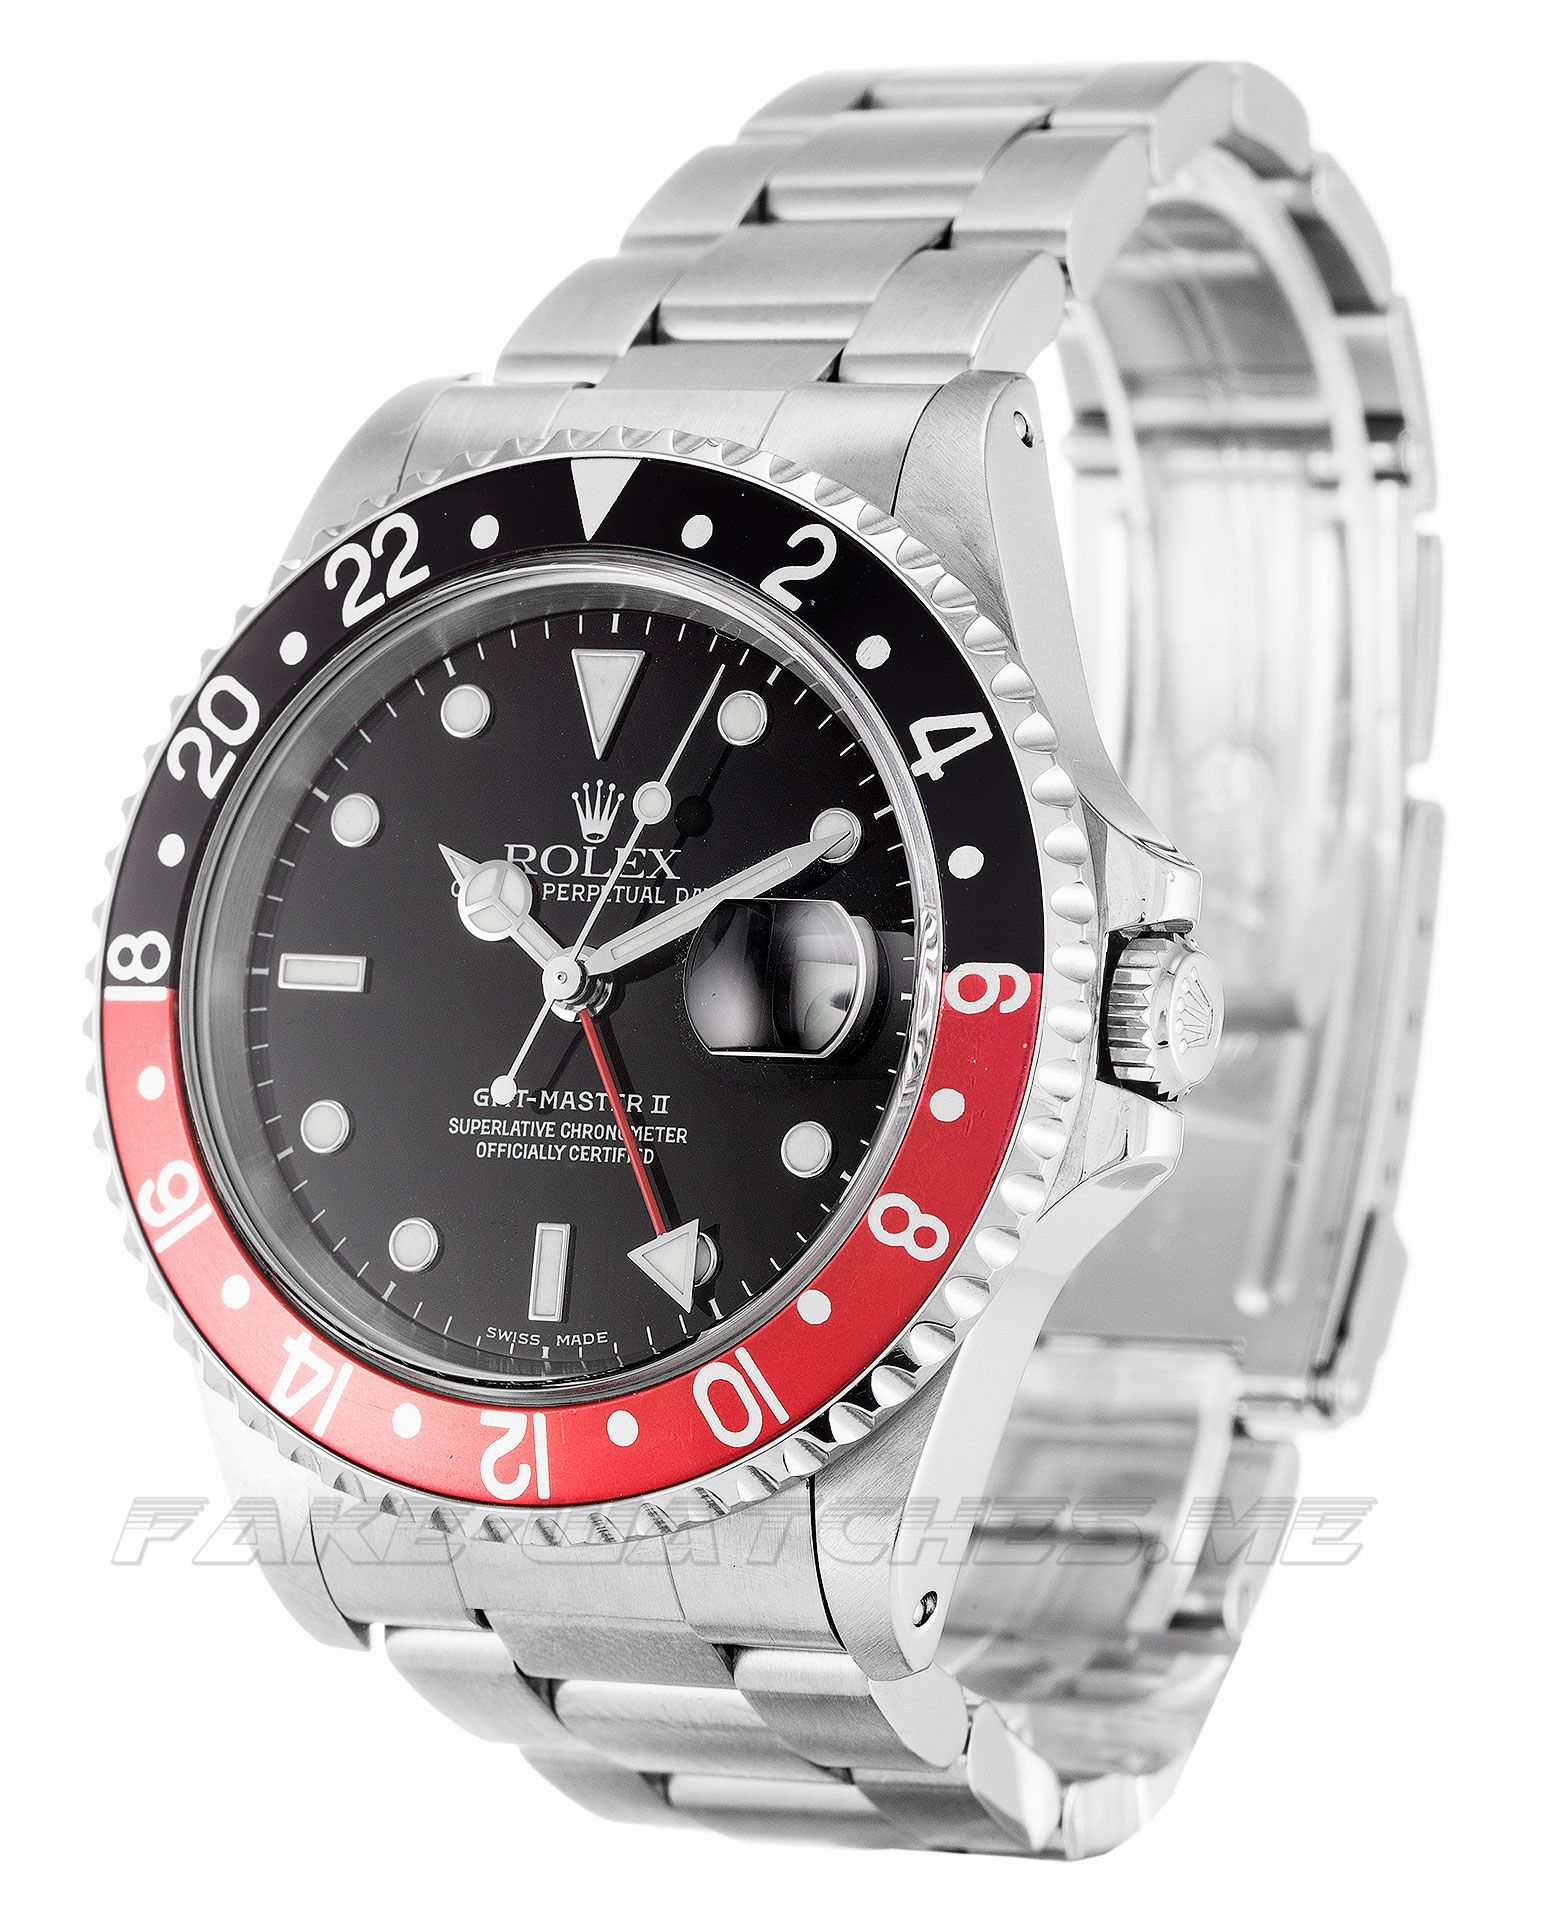 Rolex GMT Master II Mens Automatic 16710